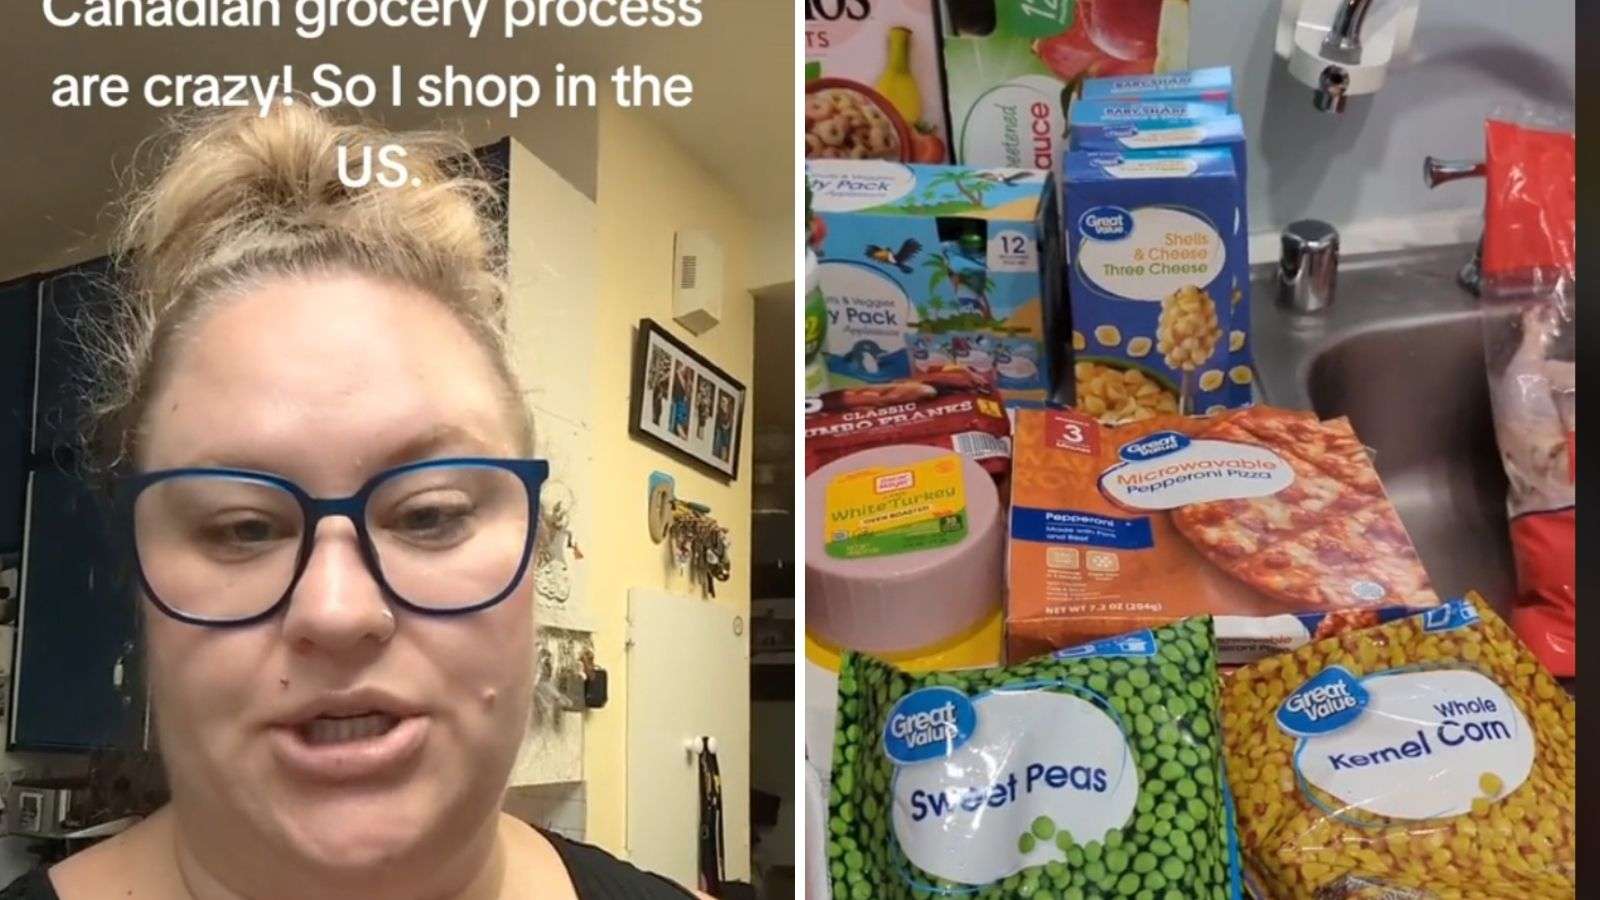 Canadian woman goes to Montana for groceries